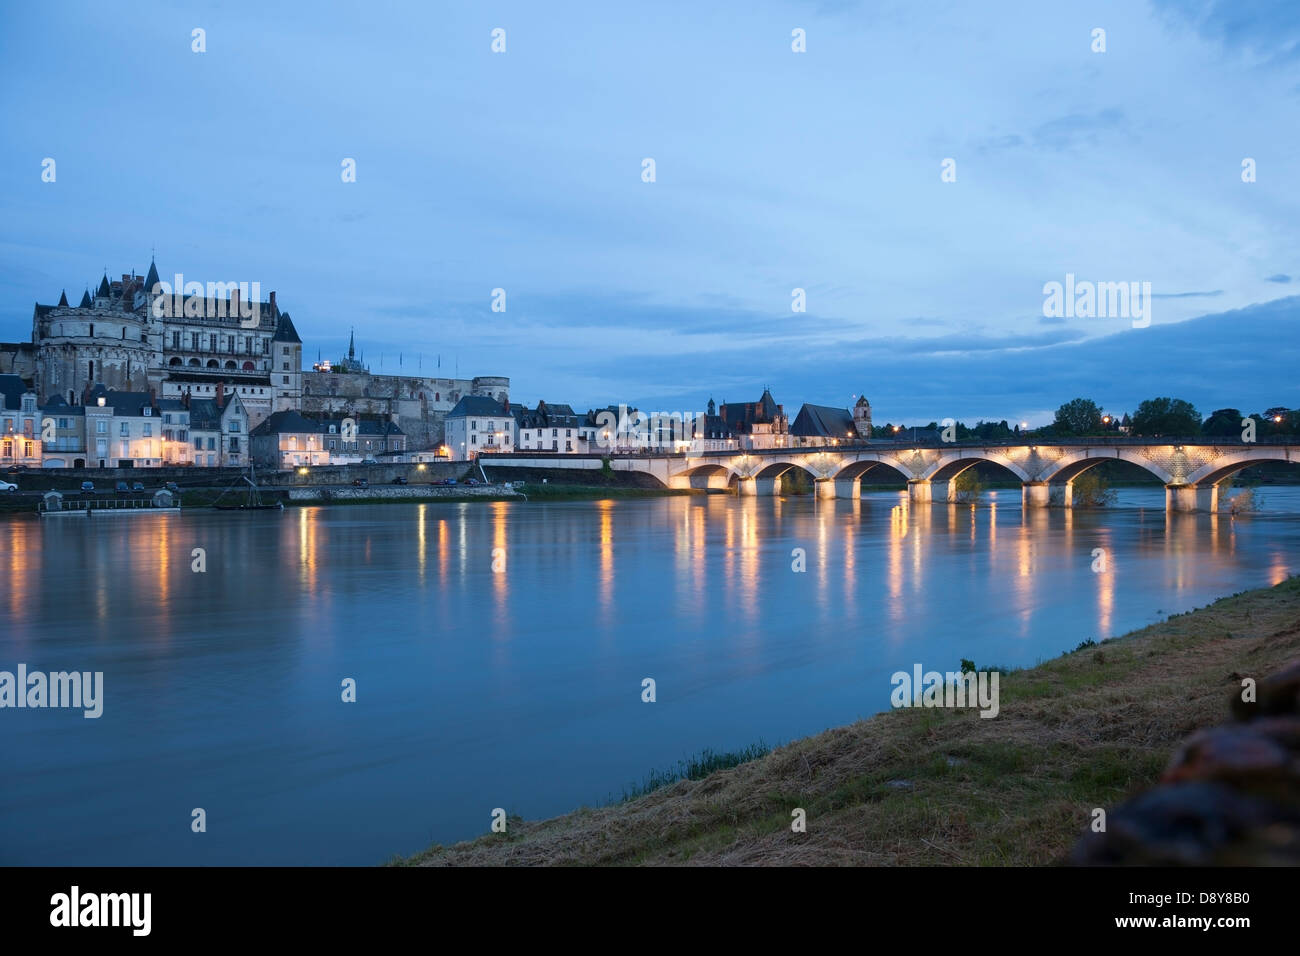 The Chateau and Lights of the Village Amboise Across the Loire River at Night, Indre et Loire Region of France Europe Stock Photo